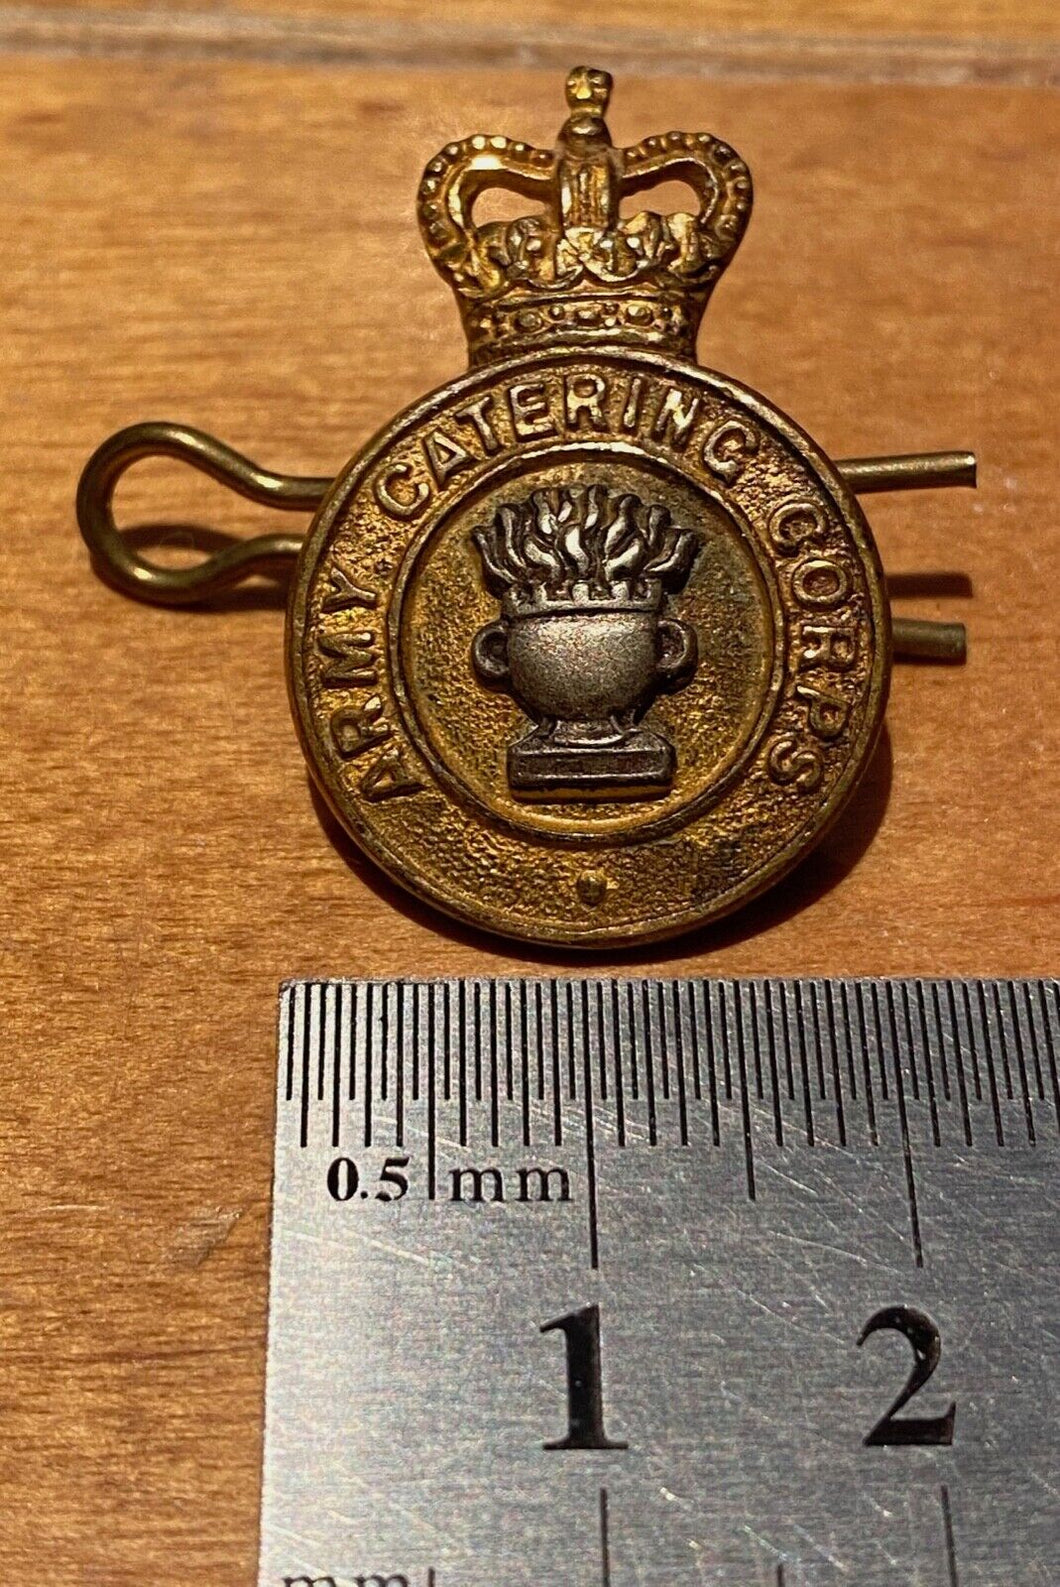 A Queens Crown - British Army CATERING CORPS gilt metal cap / collar badge - B21